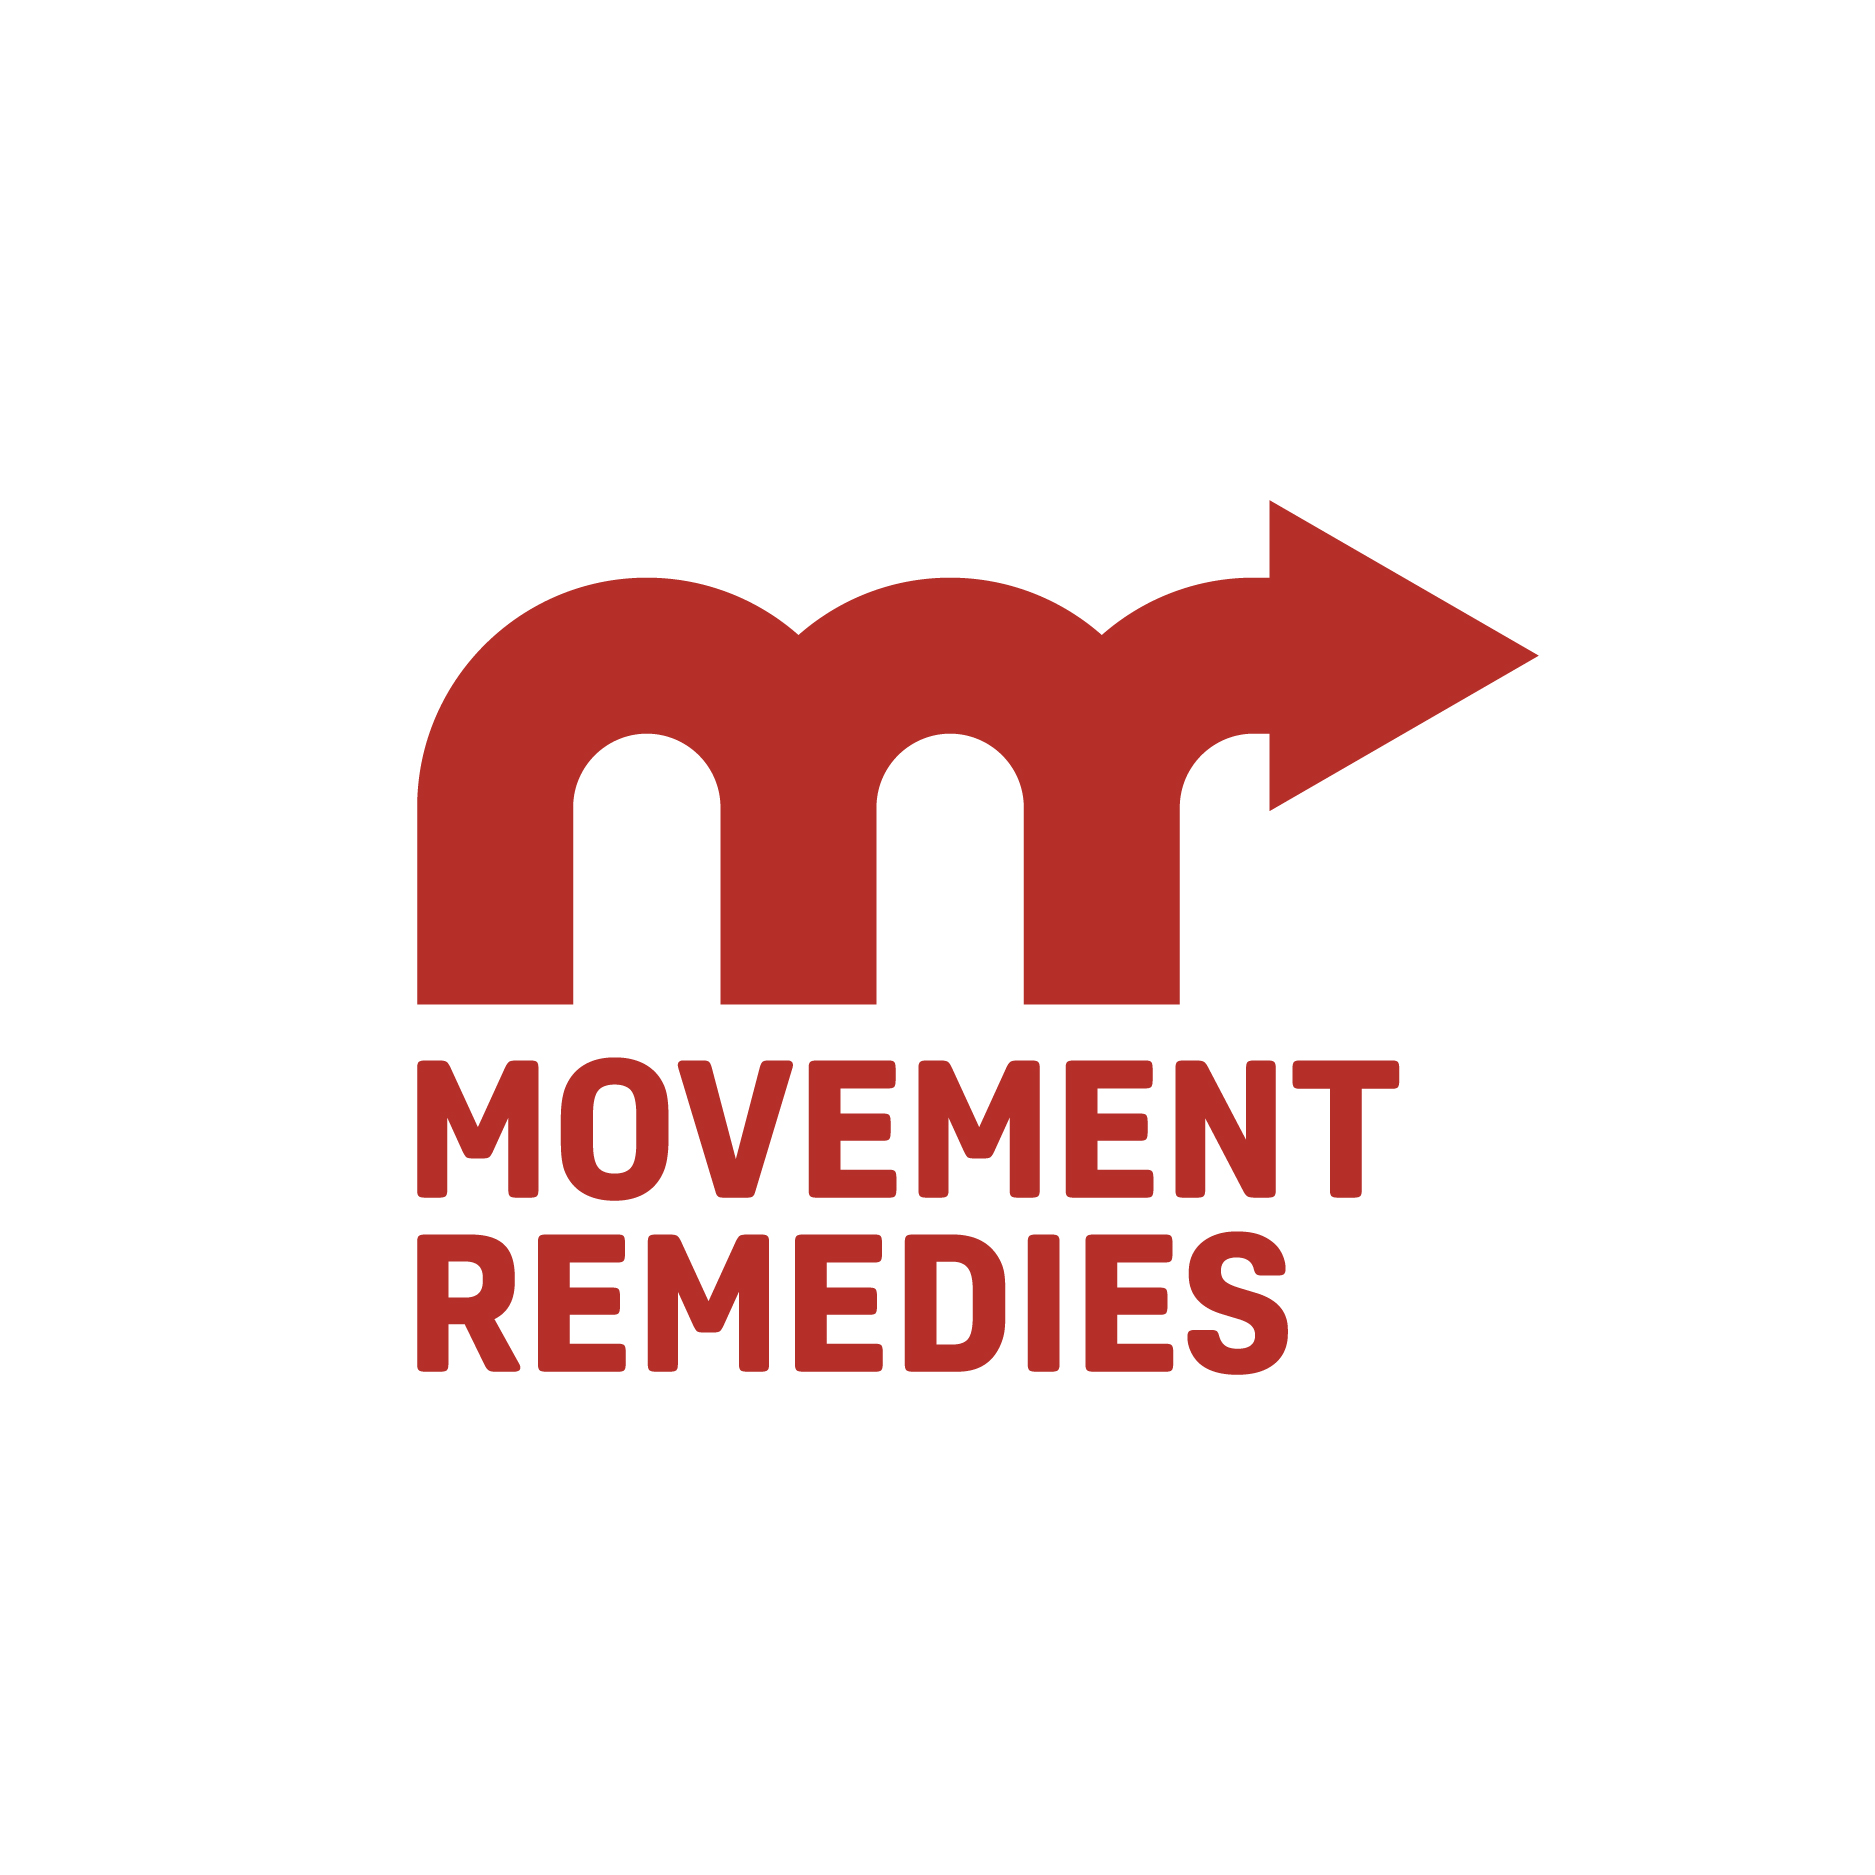 Movement Remedies logo logo design by logo designer PJ Engel Design for your inspiration and for the worlds largest logo competition